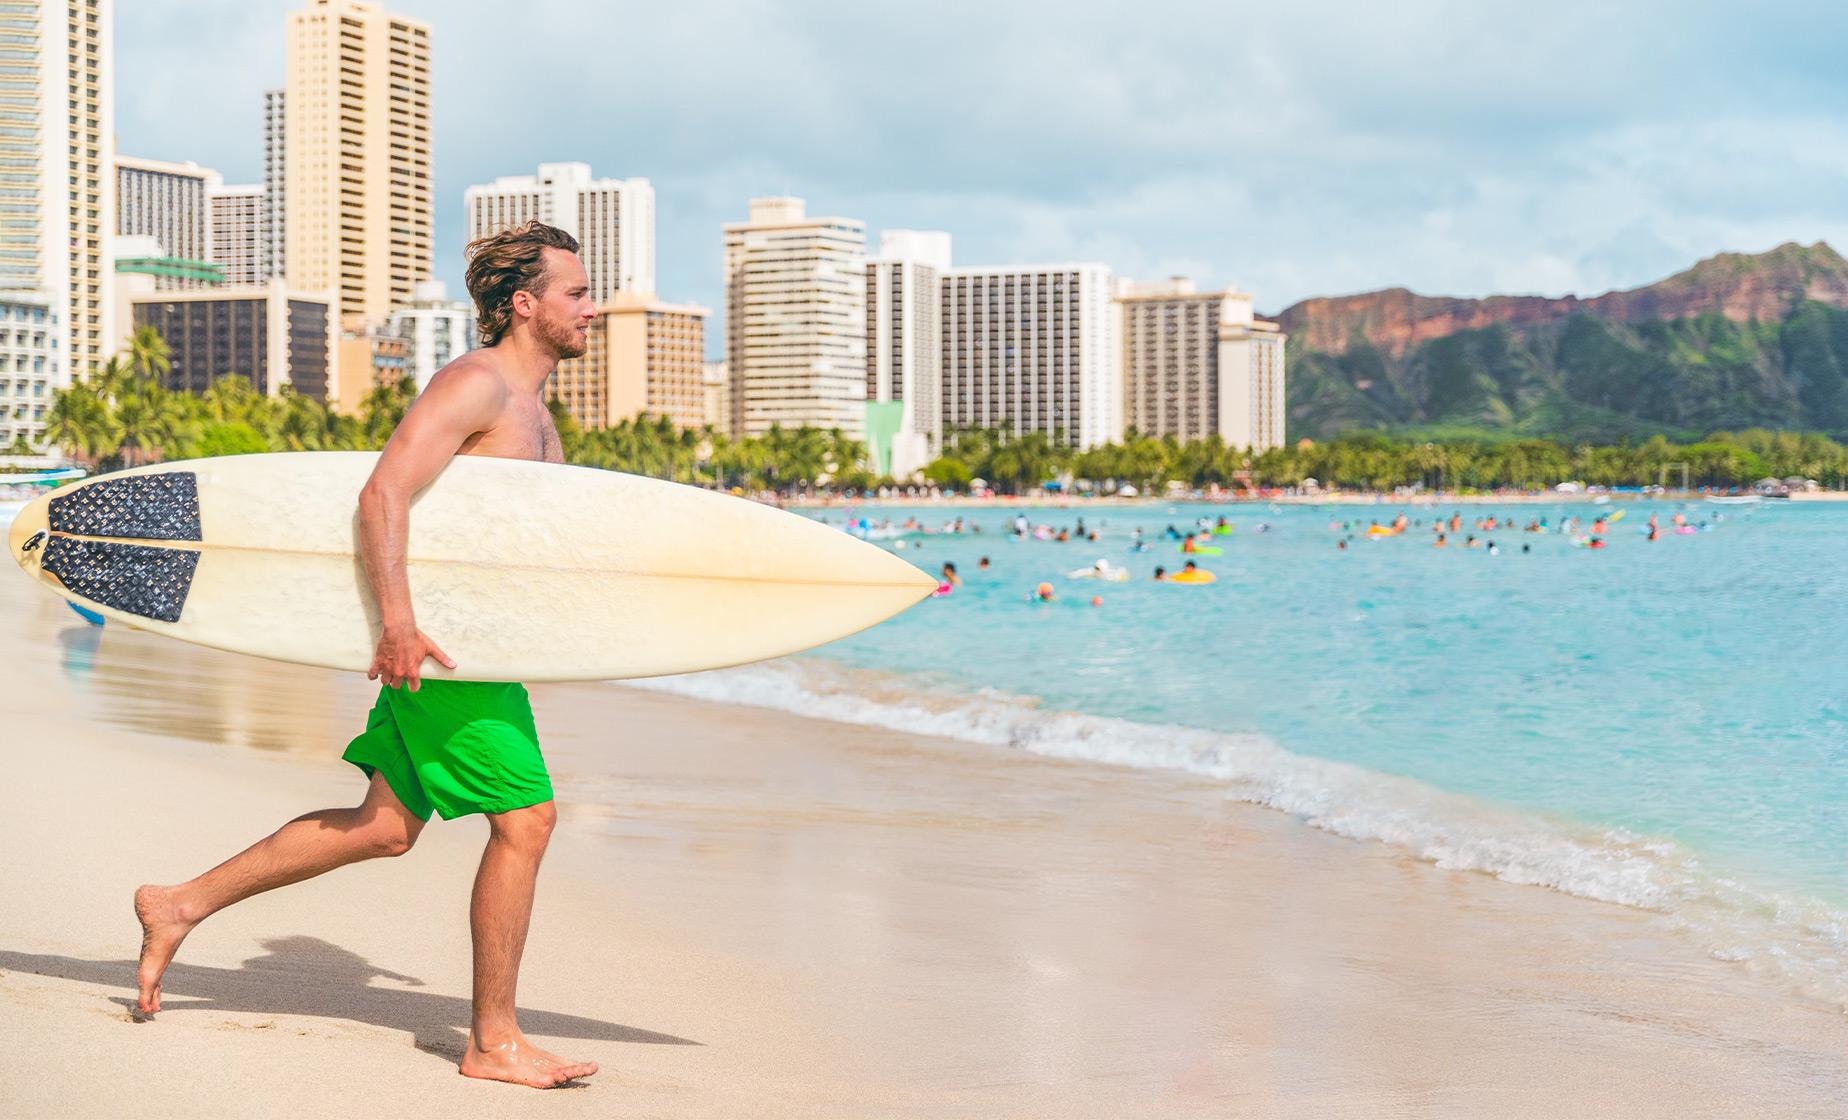 Small Group Surfing Lesson Tour in Oahu (Waikiki Beach)